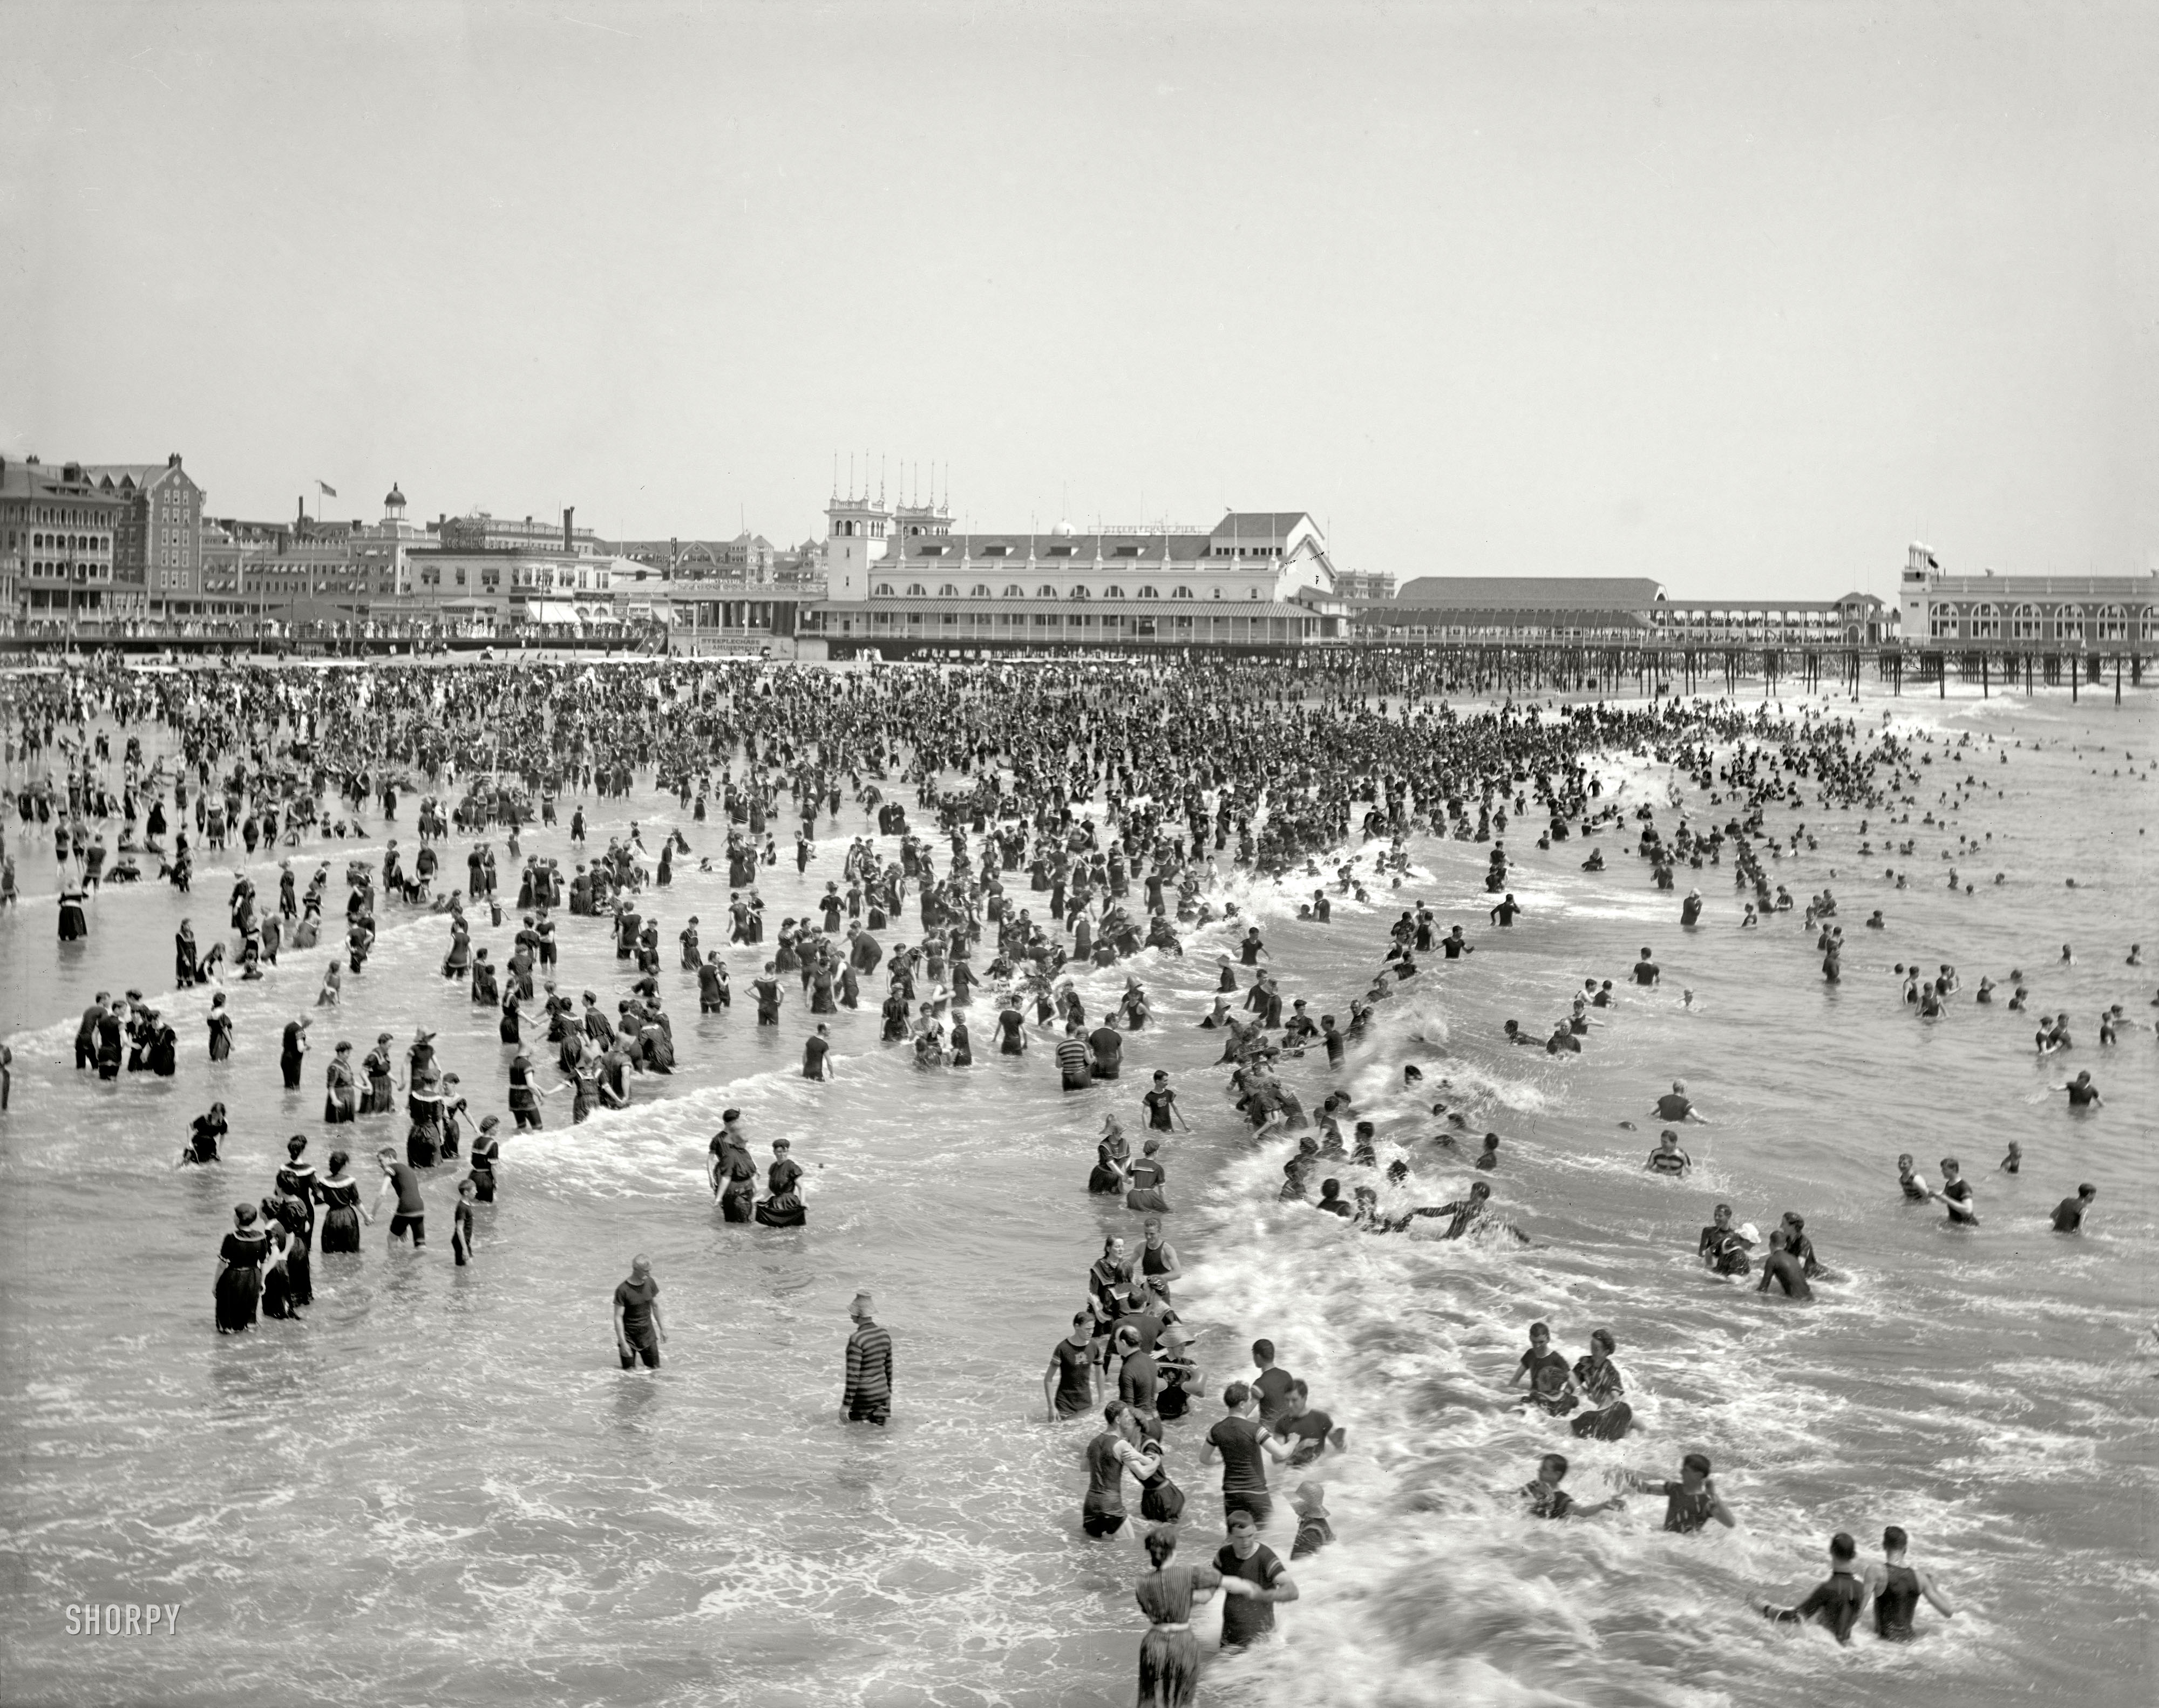 The Jersey Shore circa 1904. "Steeplechase Pier and bathers, Atlantic City." 8x10 inch dry plate glass negative, Detroit Publishing Company. View full size.